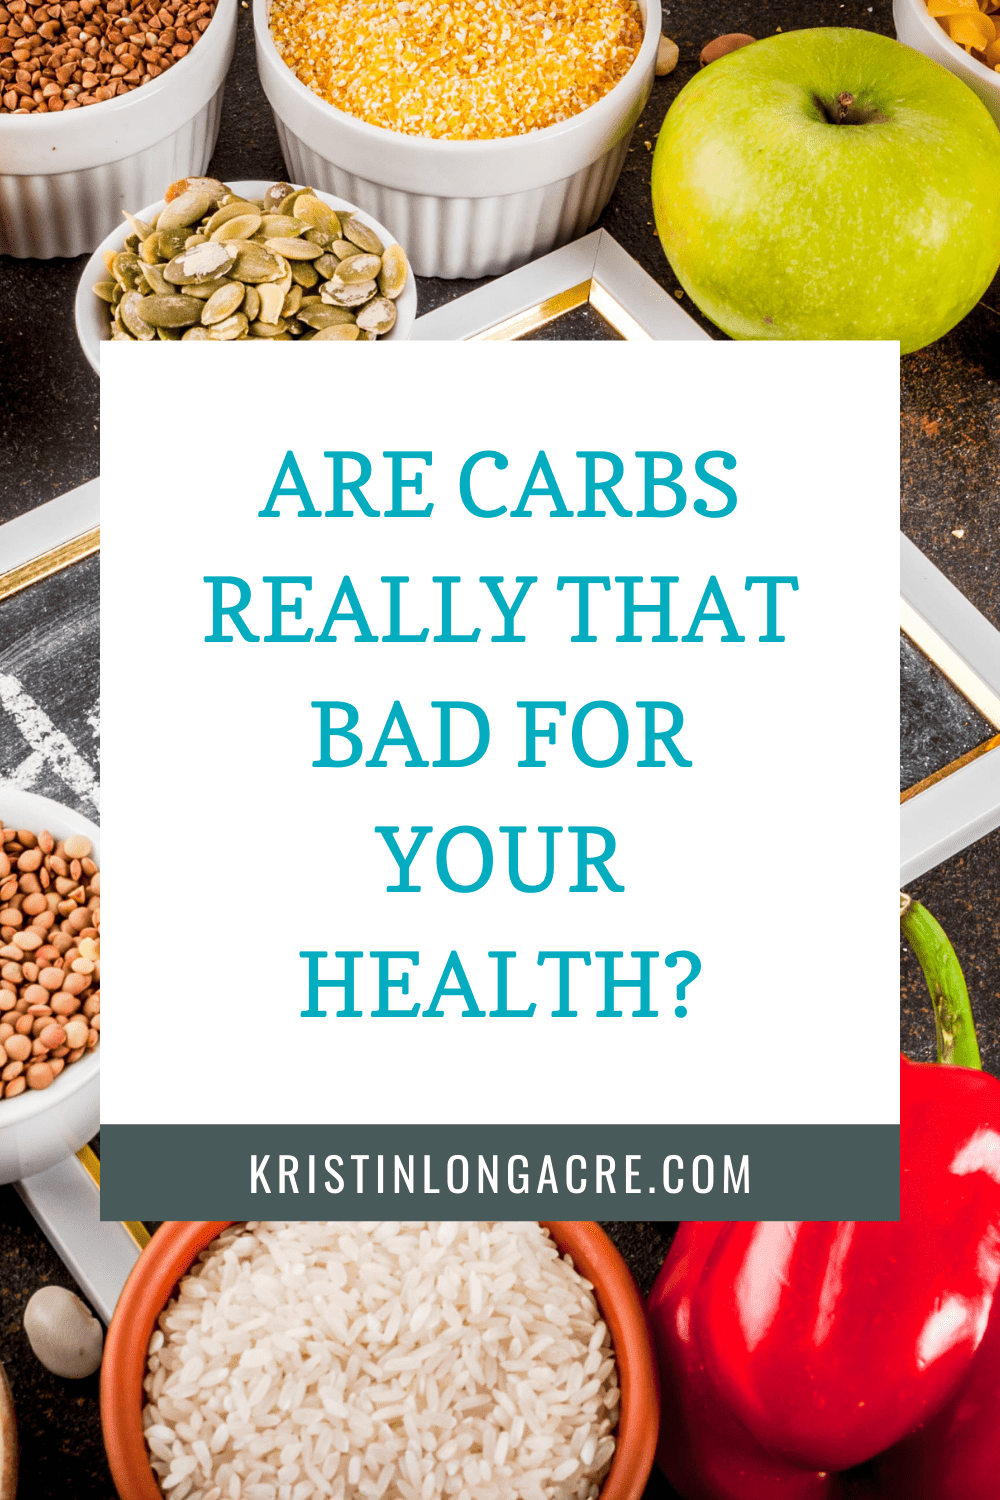 Are Carbs Really That Bad For Your Health?